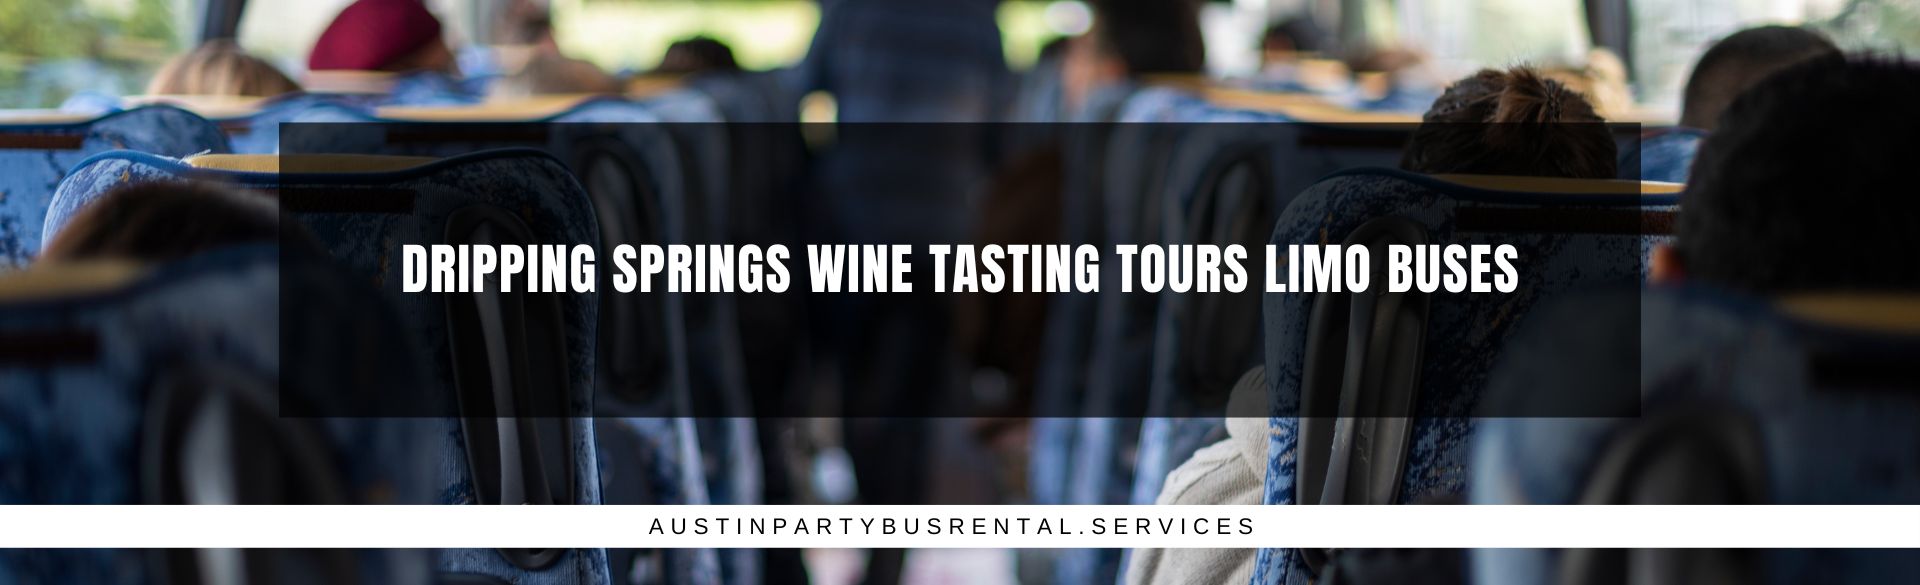 Dripping Springs Wine Tasting Tours Limo Buses